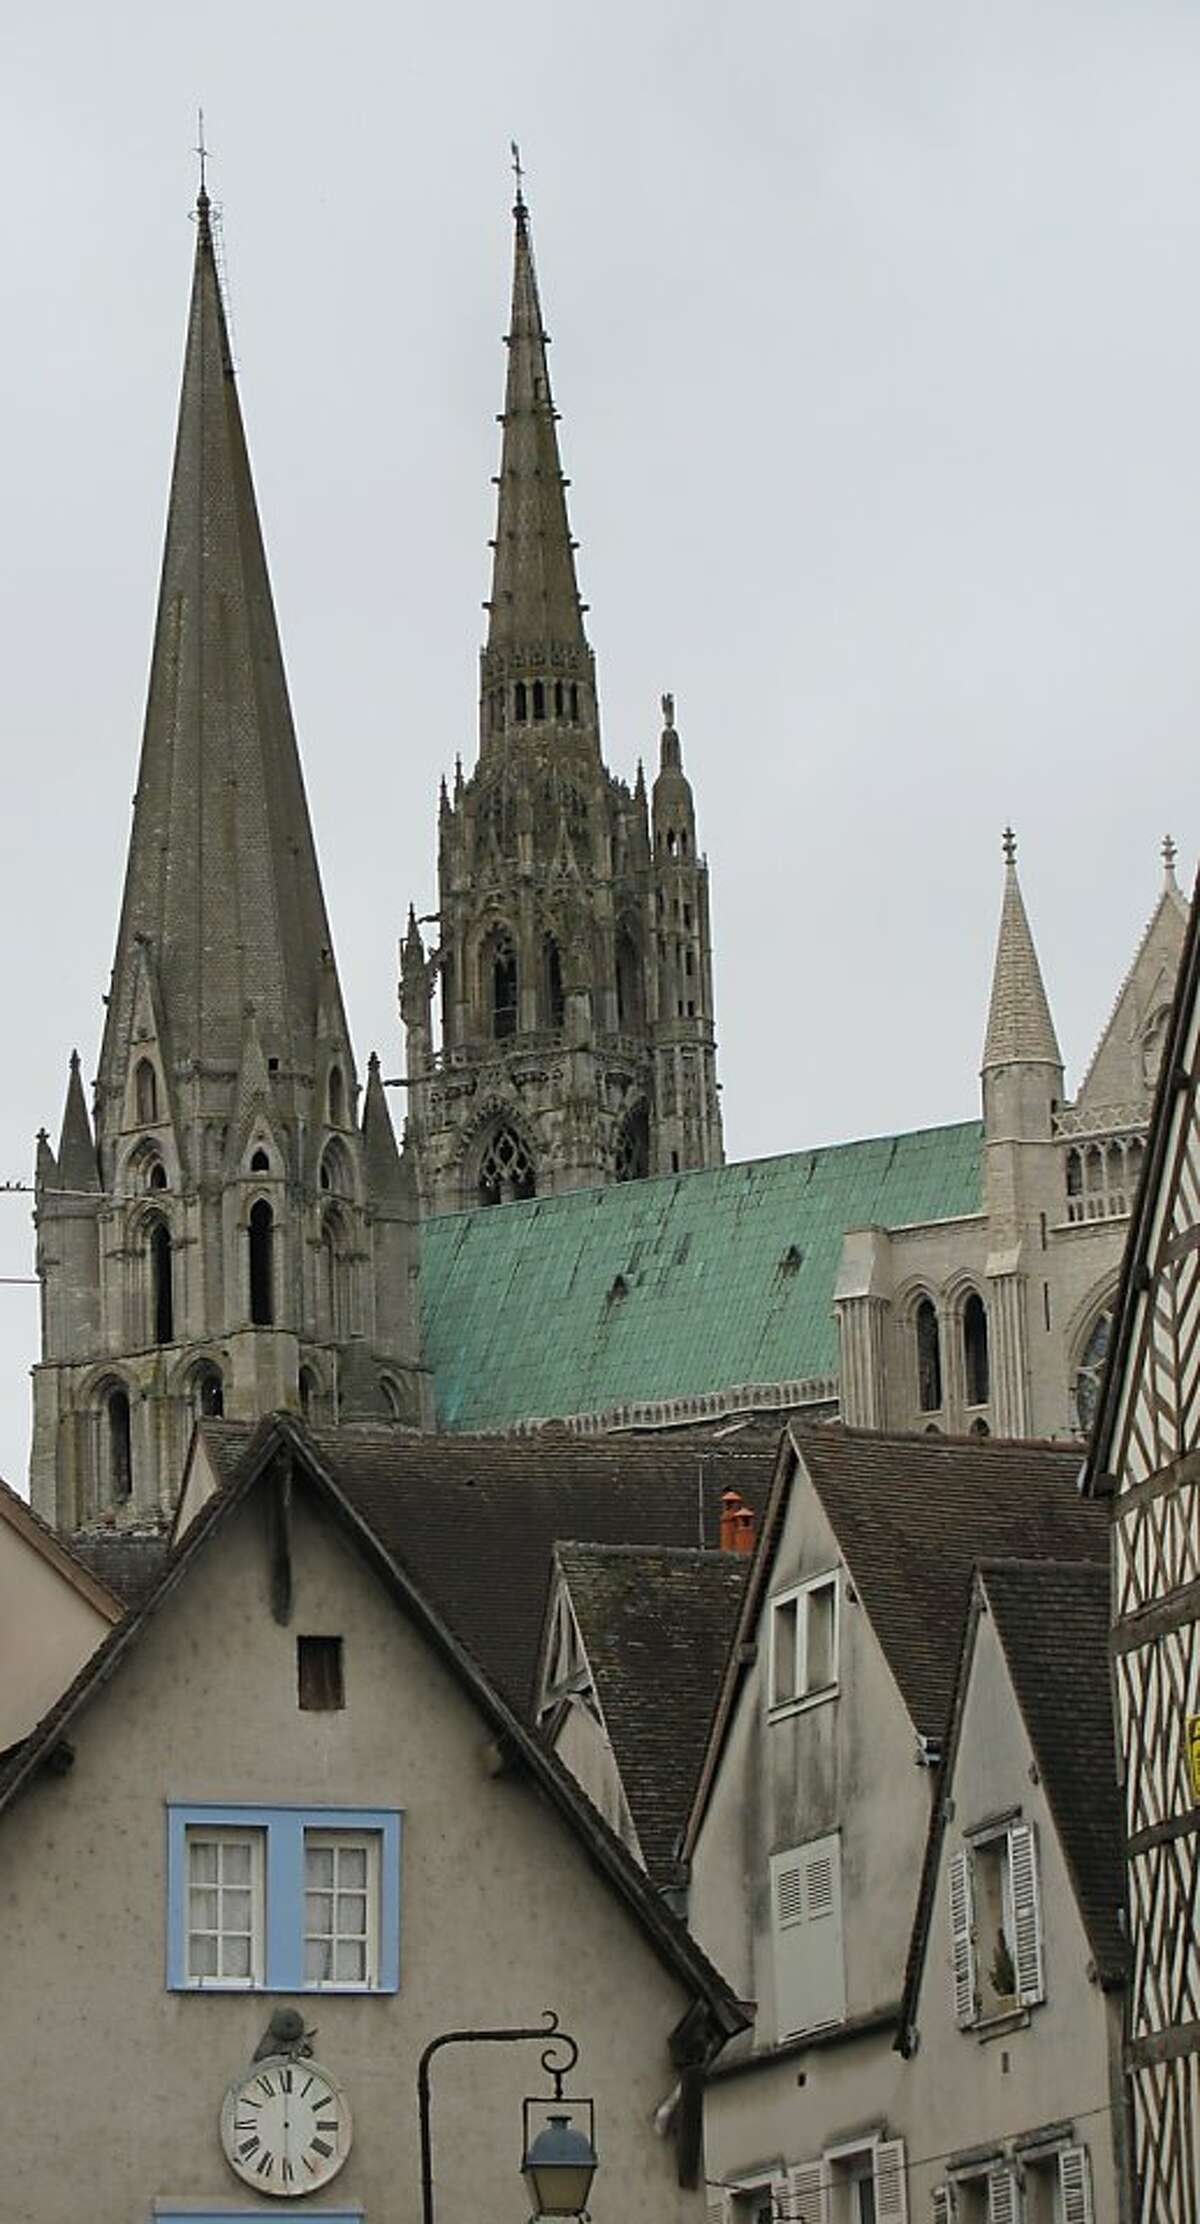 The spires of Chartres Cathedral seen from the banks of the Eure River, with a half-timbered building in the foreground.